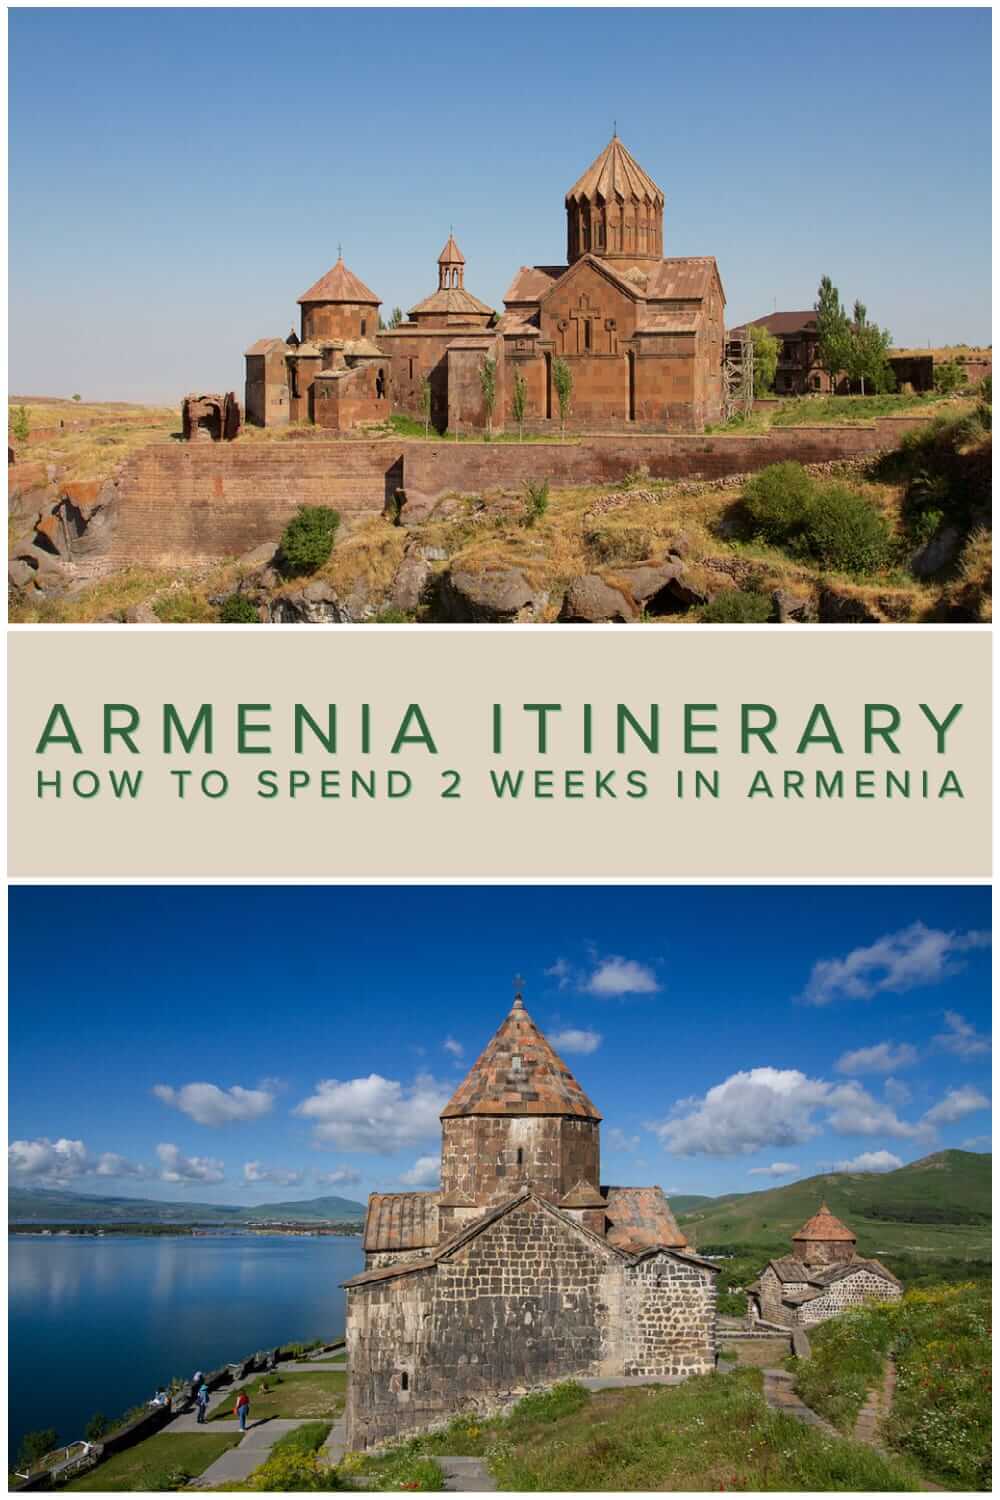 Armenia Itinerary – What to see in Armenia in 2 weeks #travel #backpacking #travelplanning #Caucasus